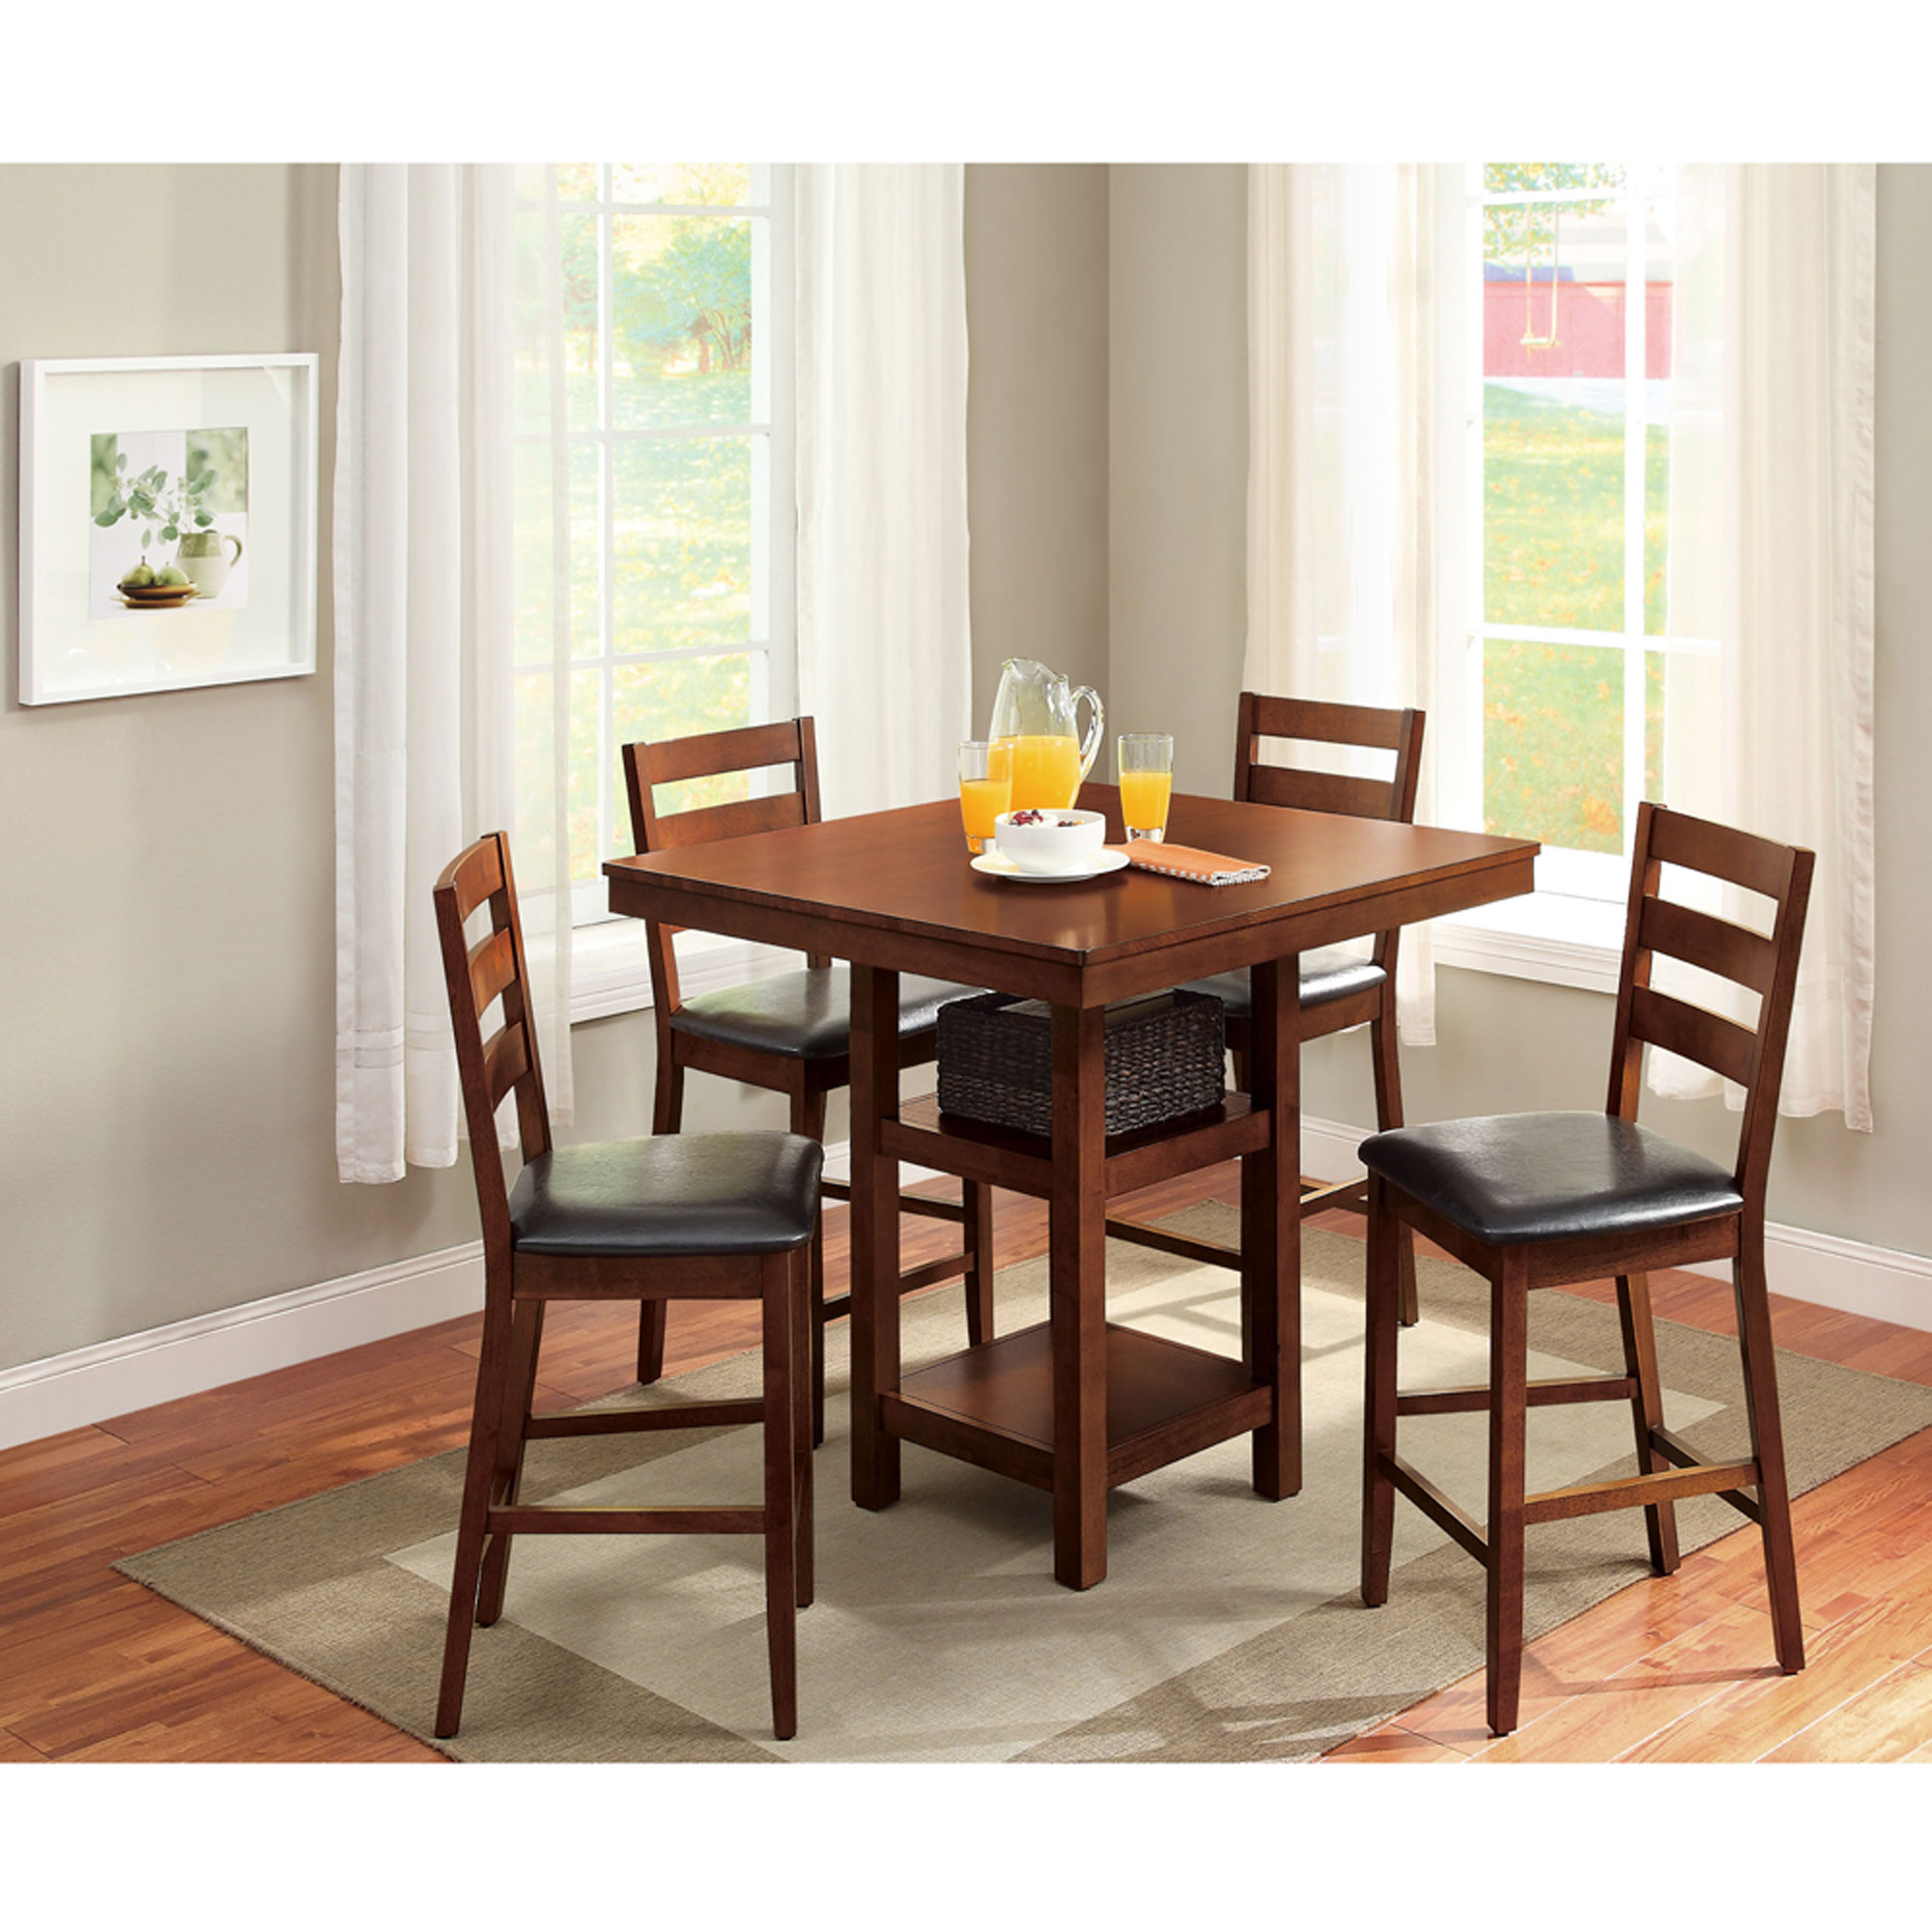 dining room table and chairs kitchen u0026 dining furniture - walmart.com BQGUPHD